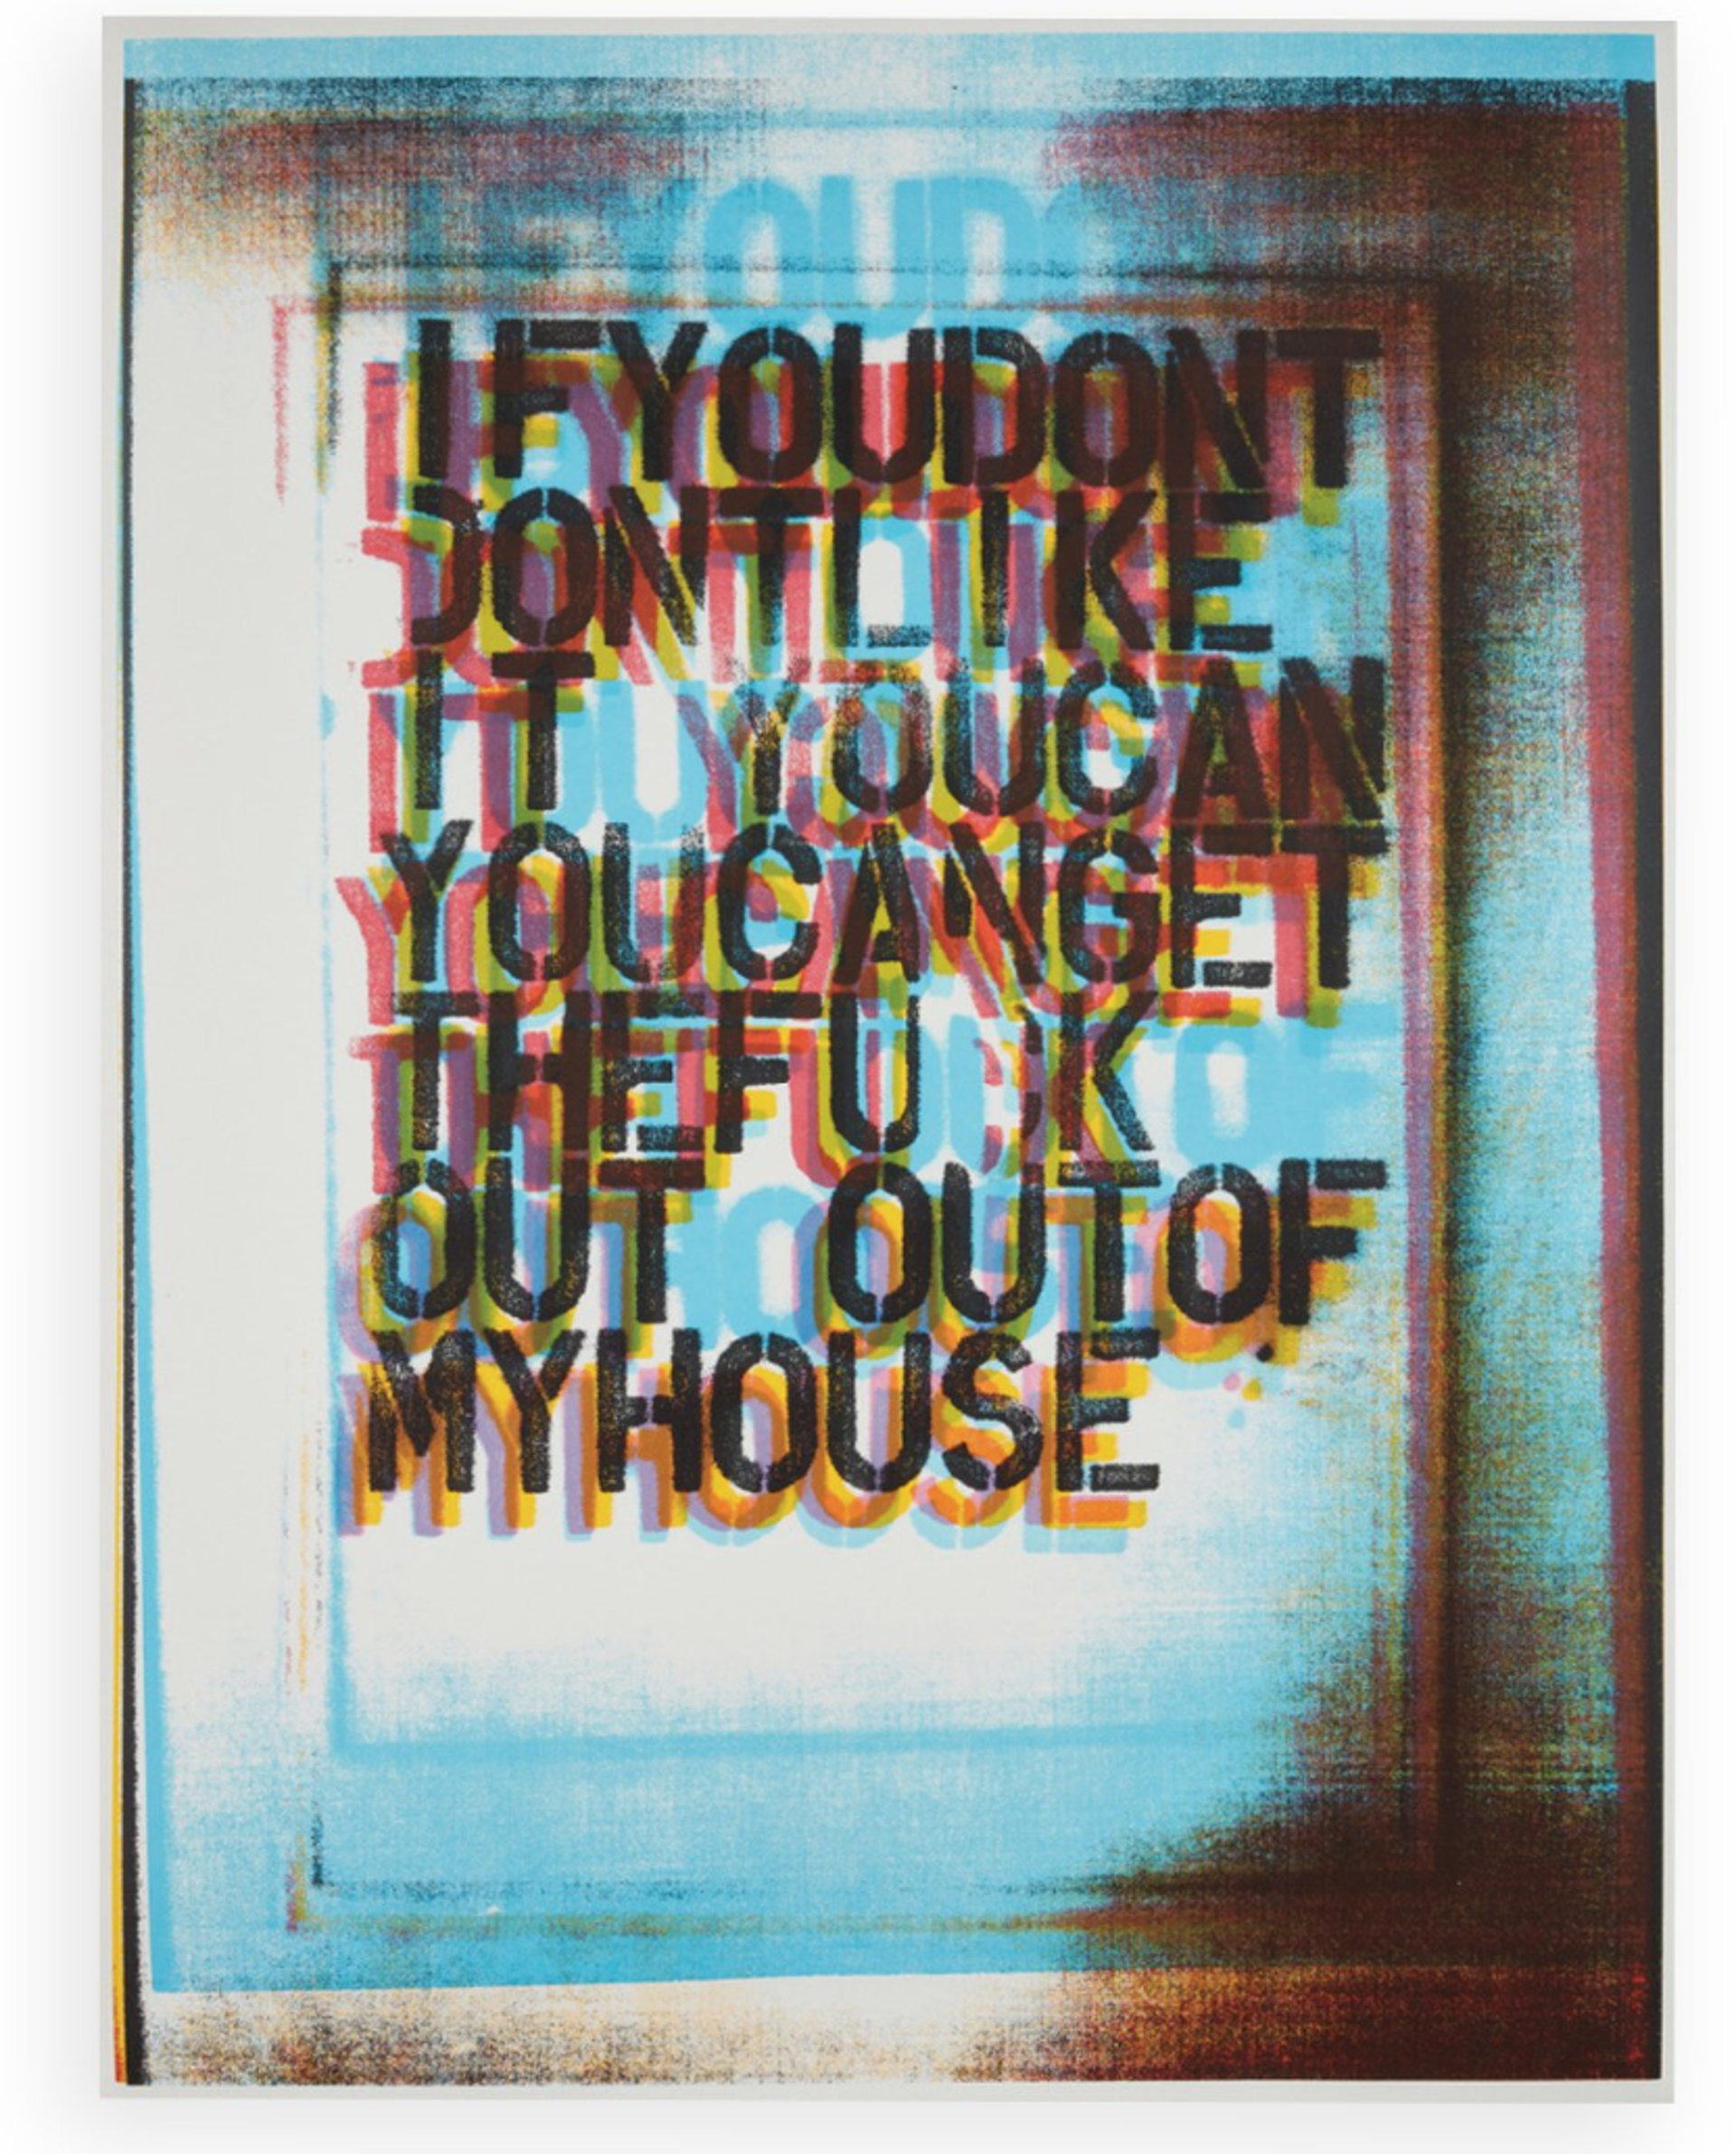 My House II by Christopher Wool